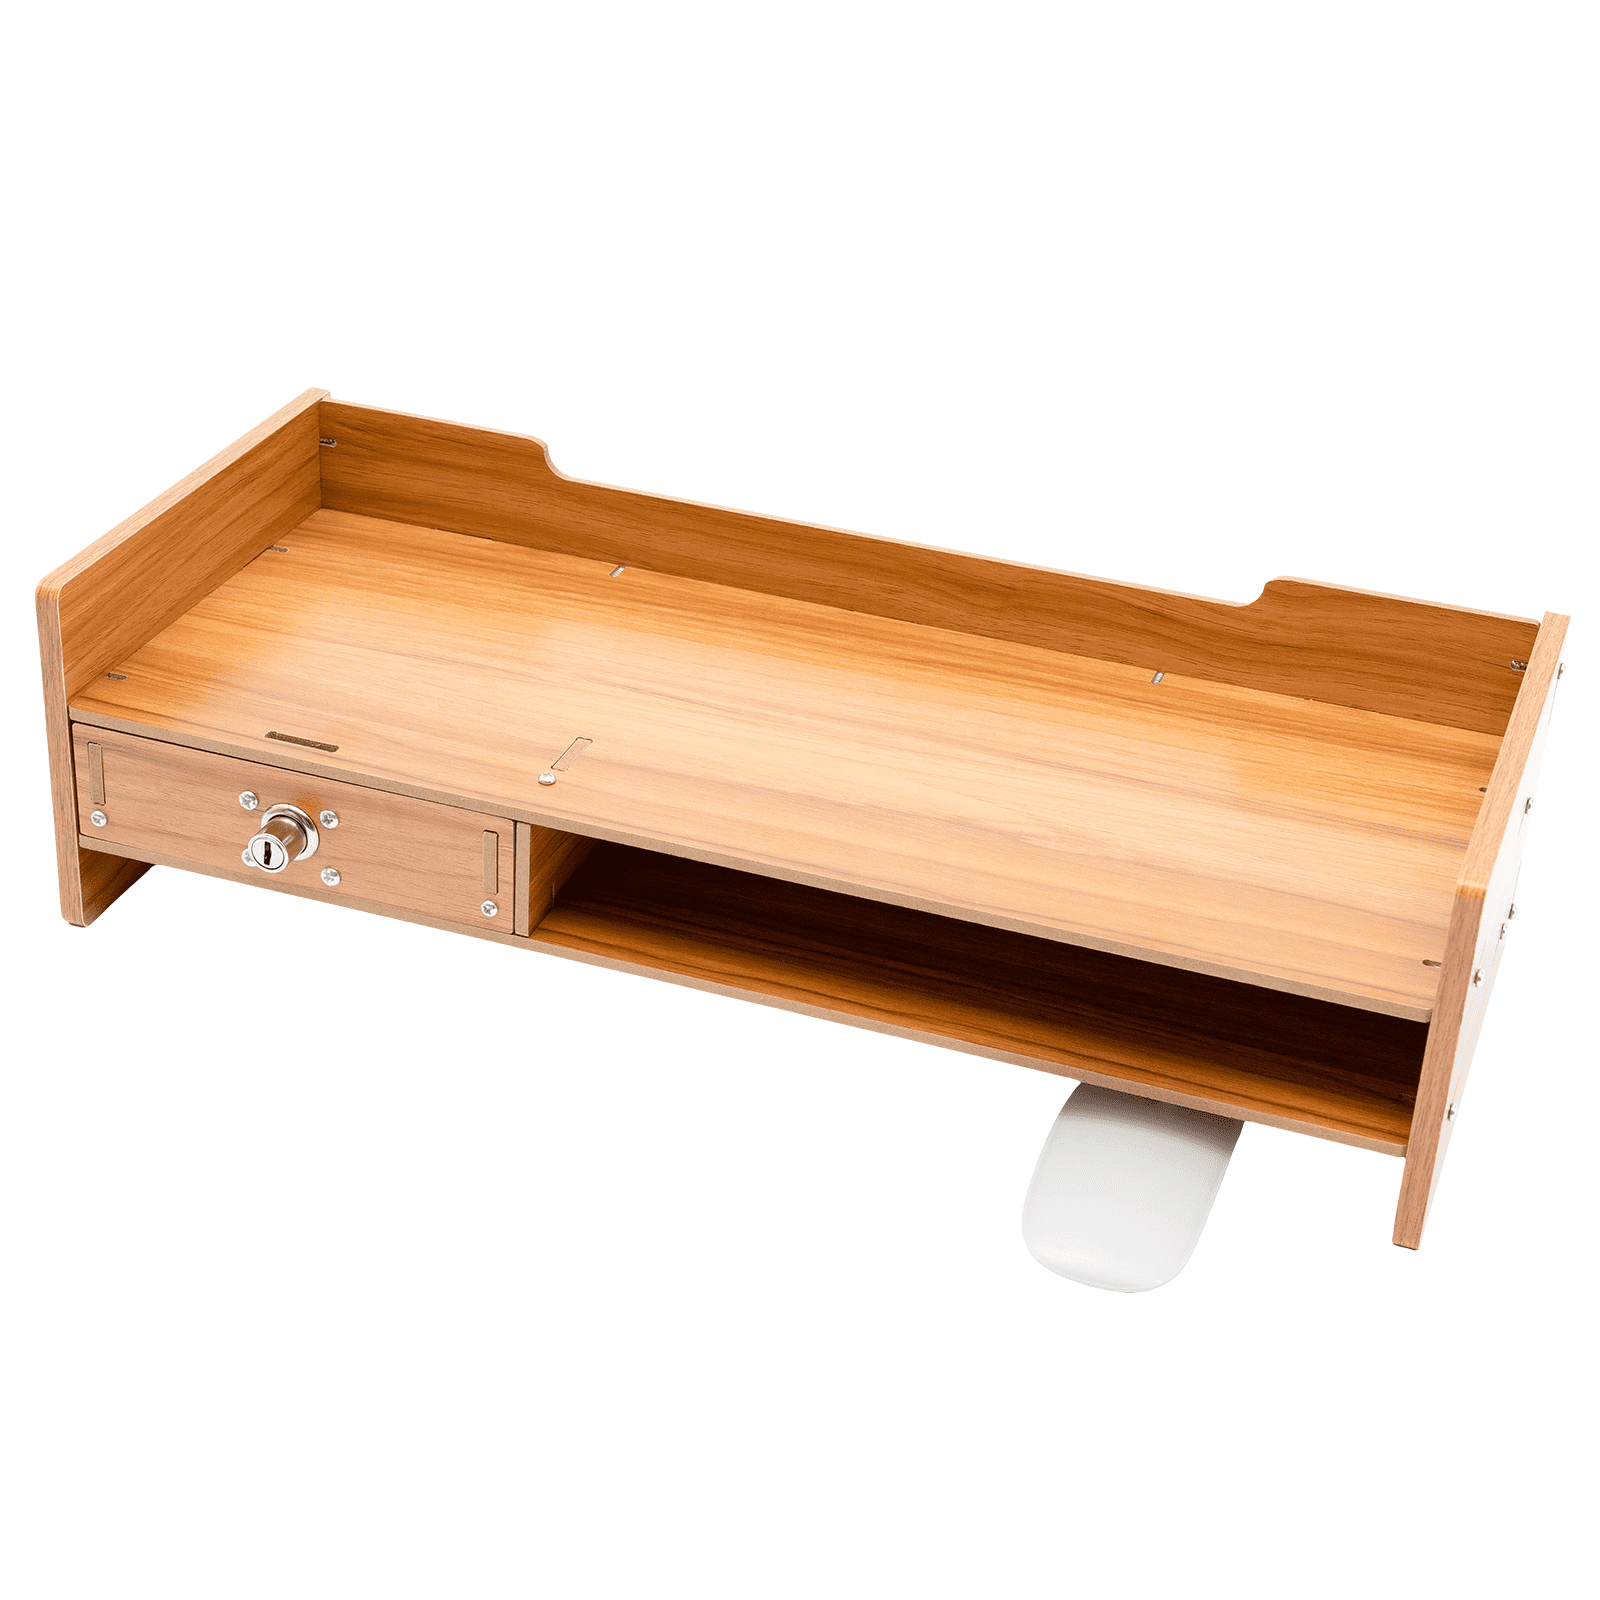 Oakywood Desk Shelf, Dual Monitor Stand Wood, Home Office, Desk Accessories  Organizer, Office Storage and Organization, Gift for Him 